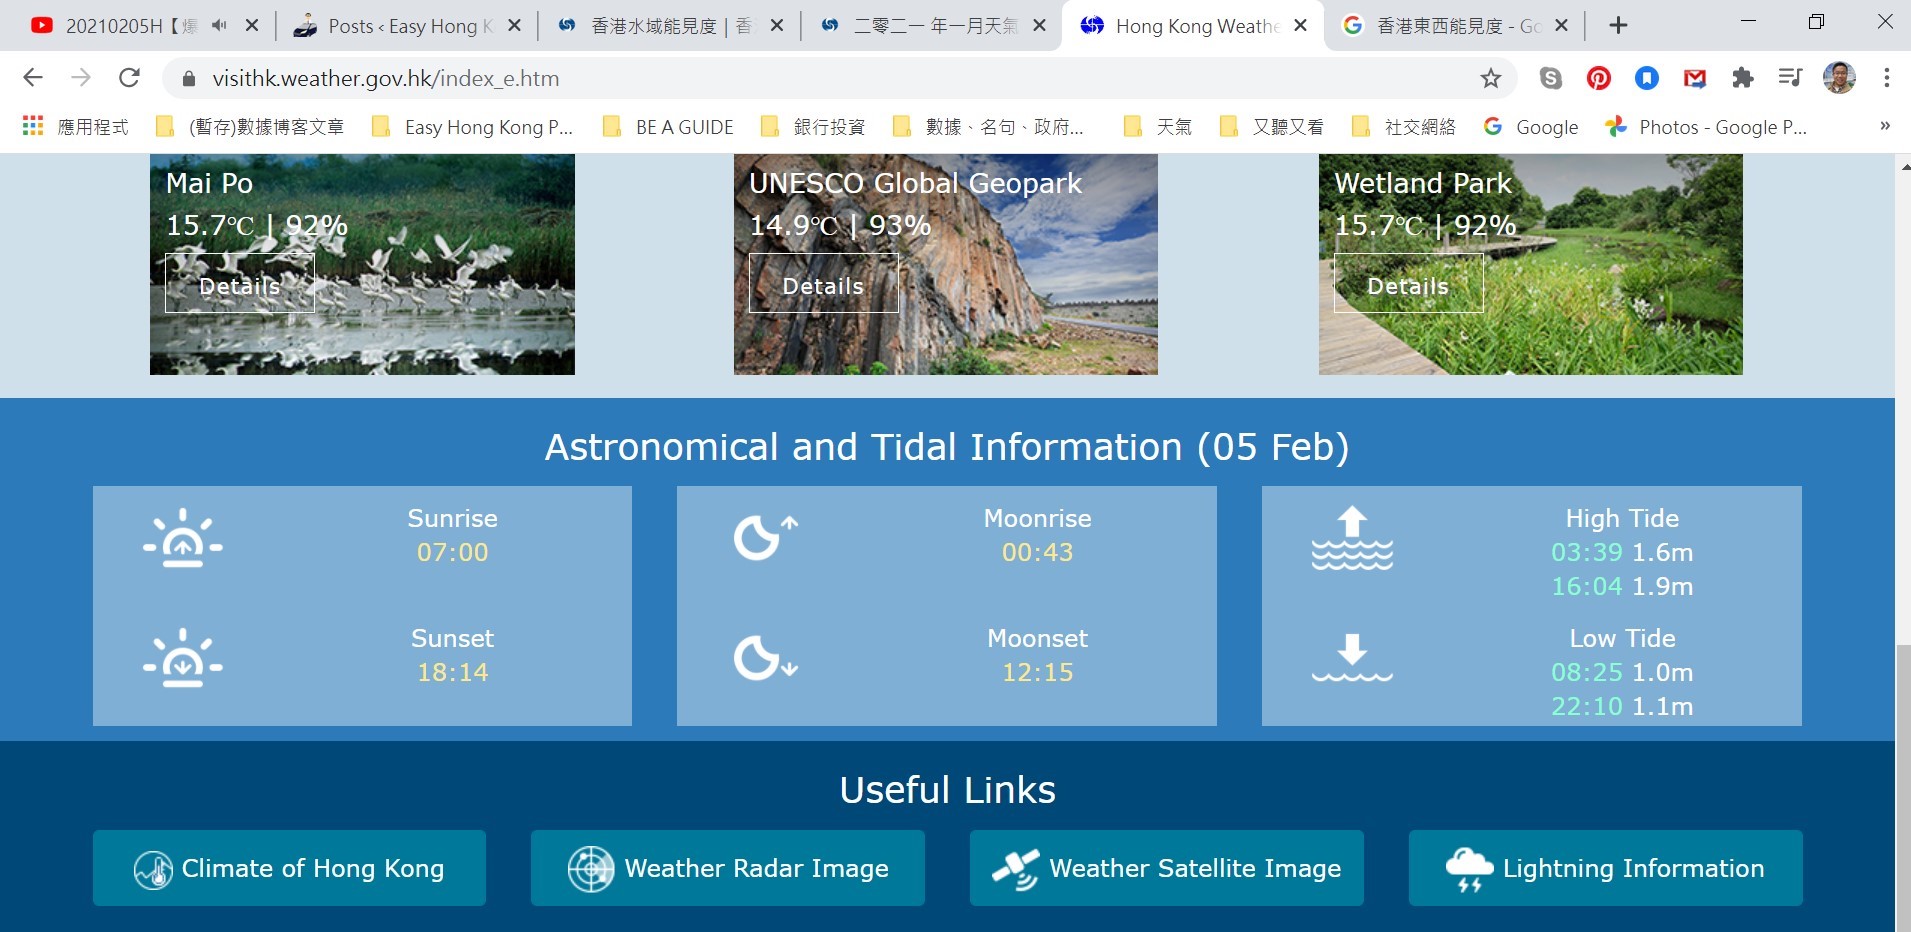 Astronomical and Tidal Information is at the bottom of the page